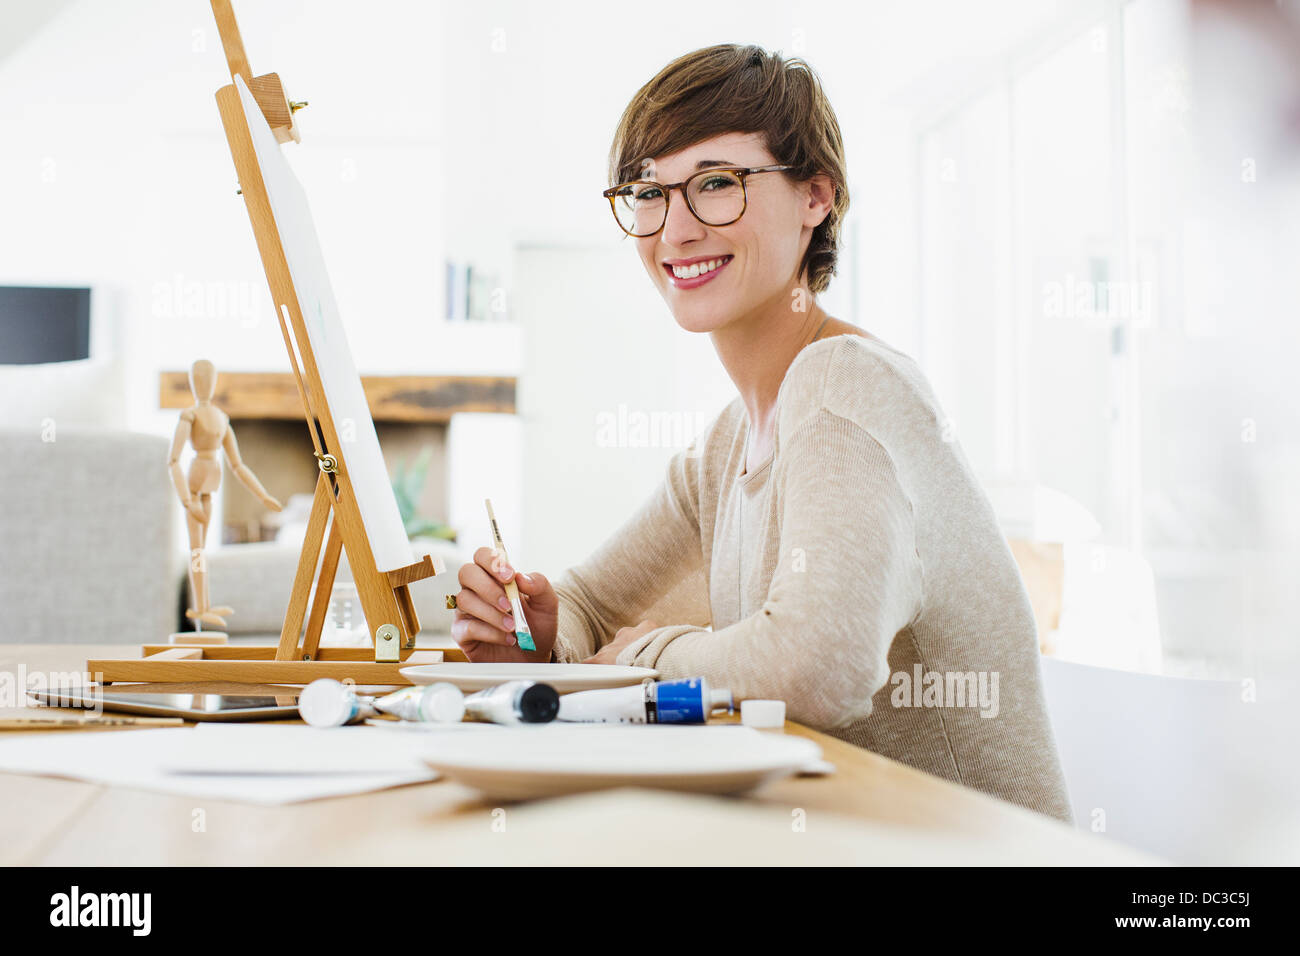 Portrait of smiling woman painting at easel on table Stock Photo